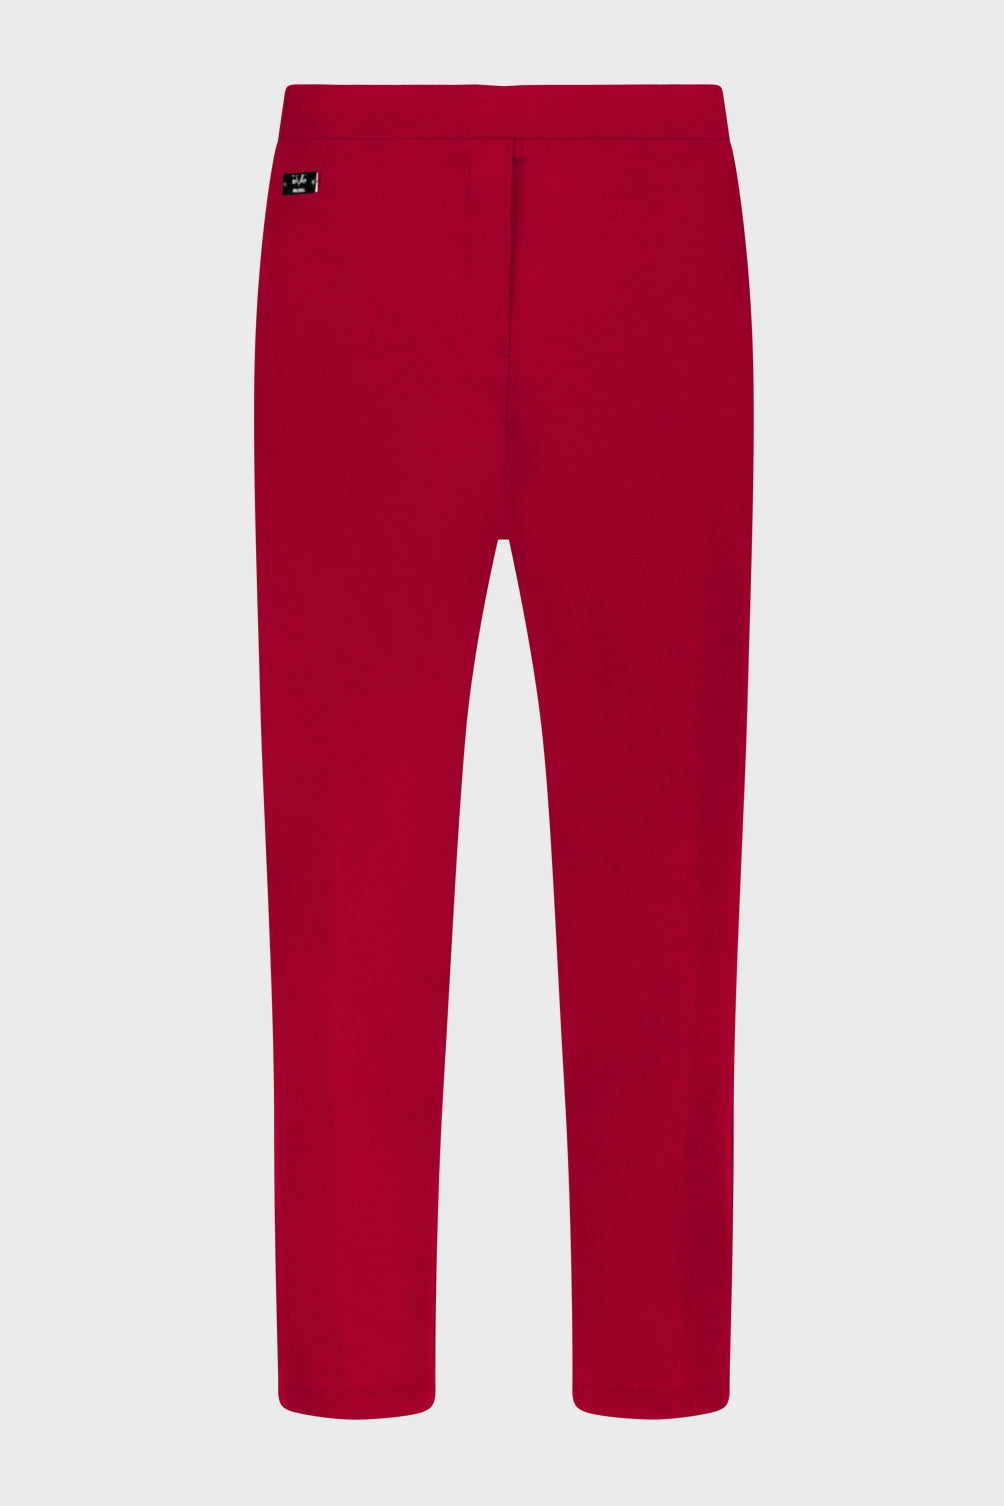 19V69 Italia Womens Trousers Red BOND RED